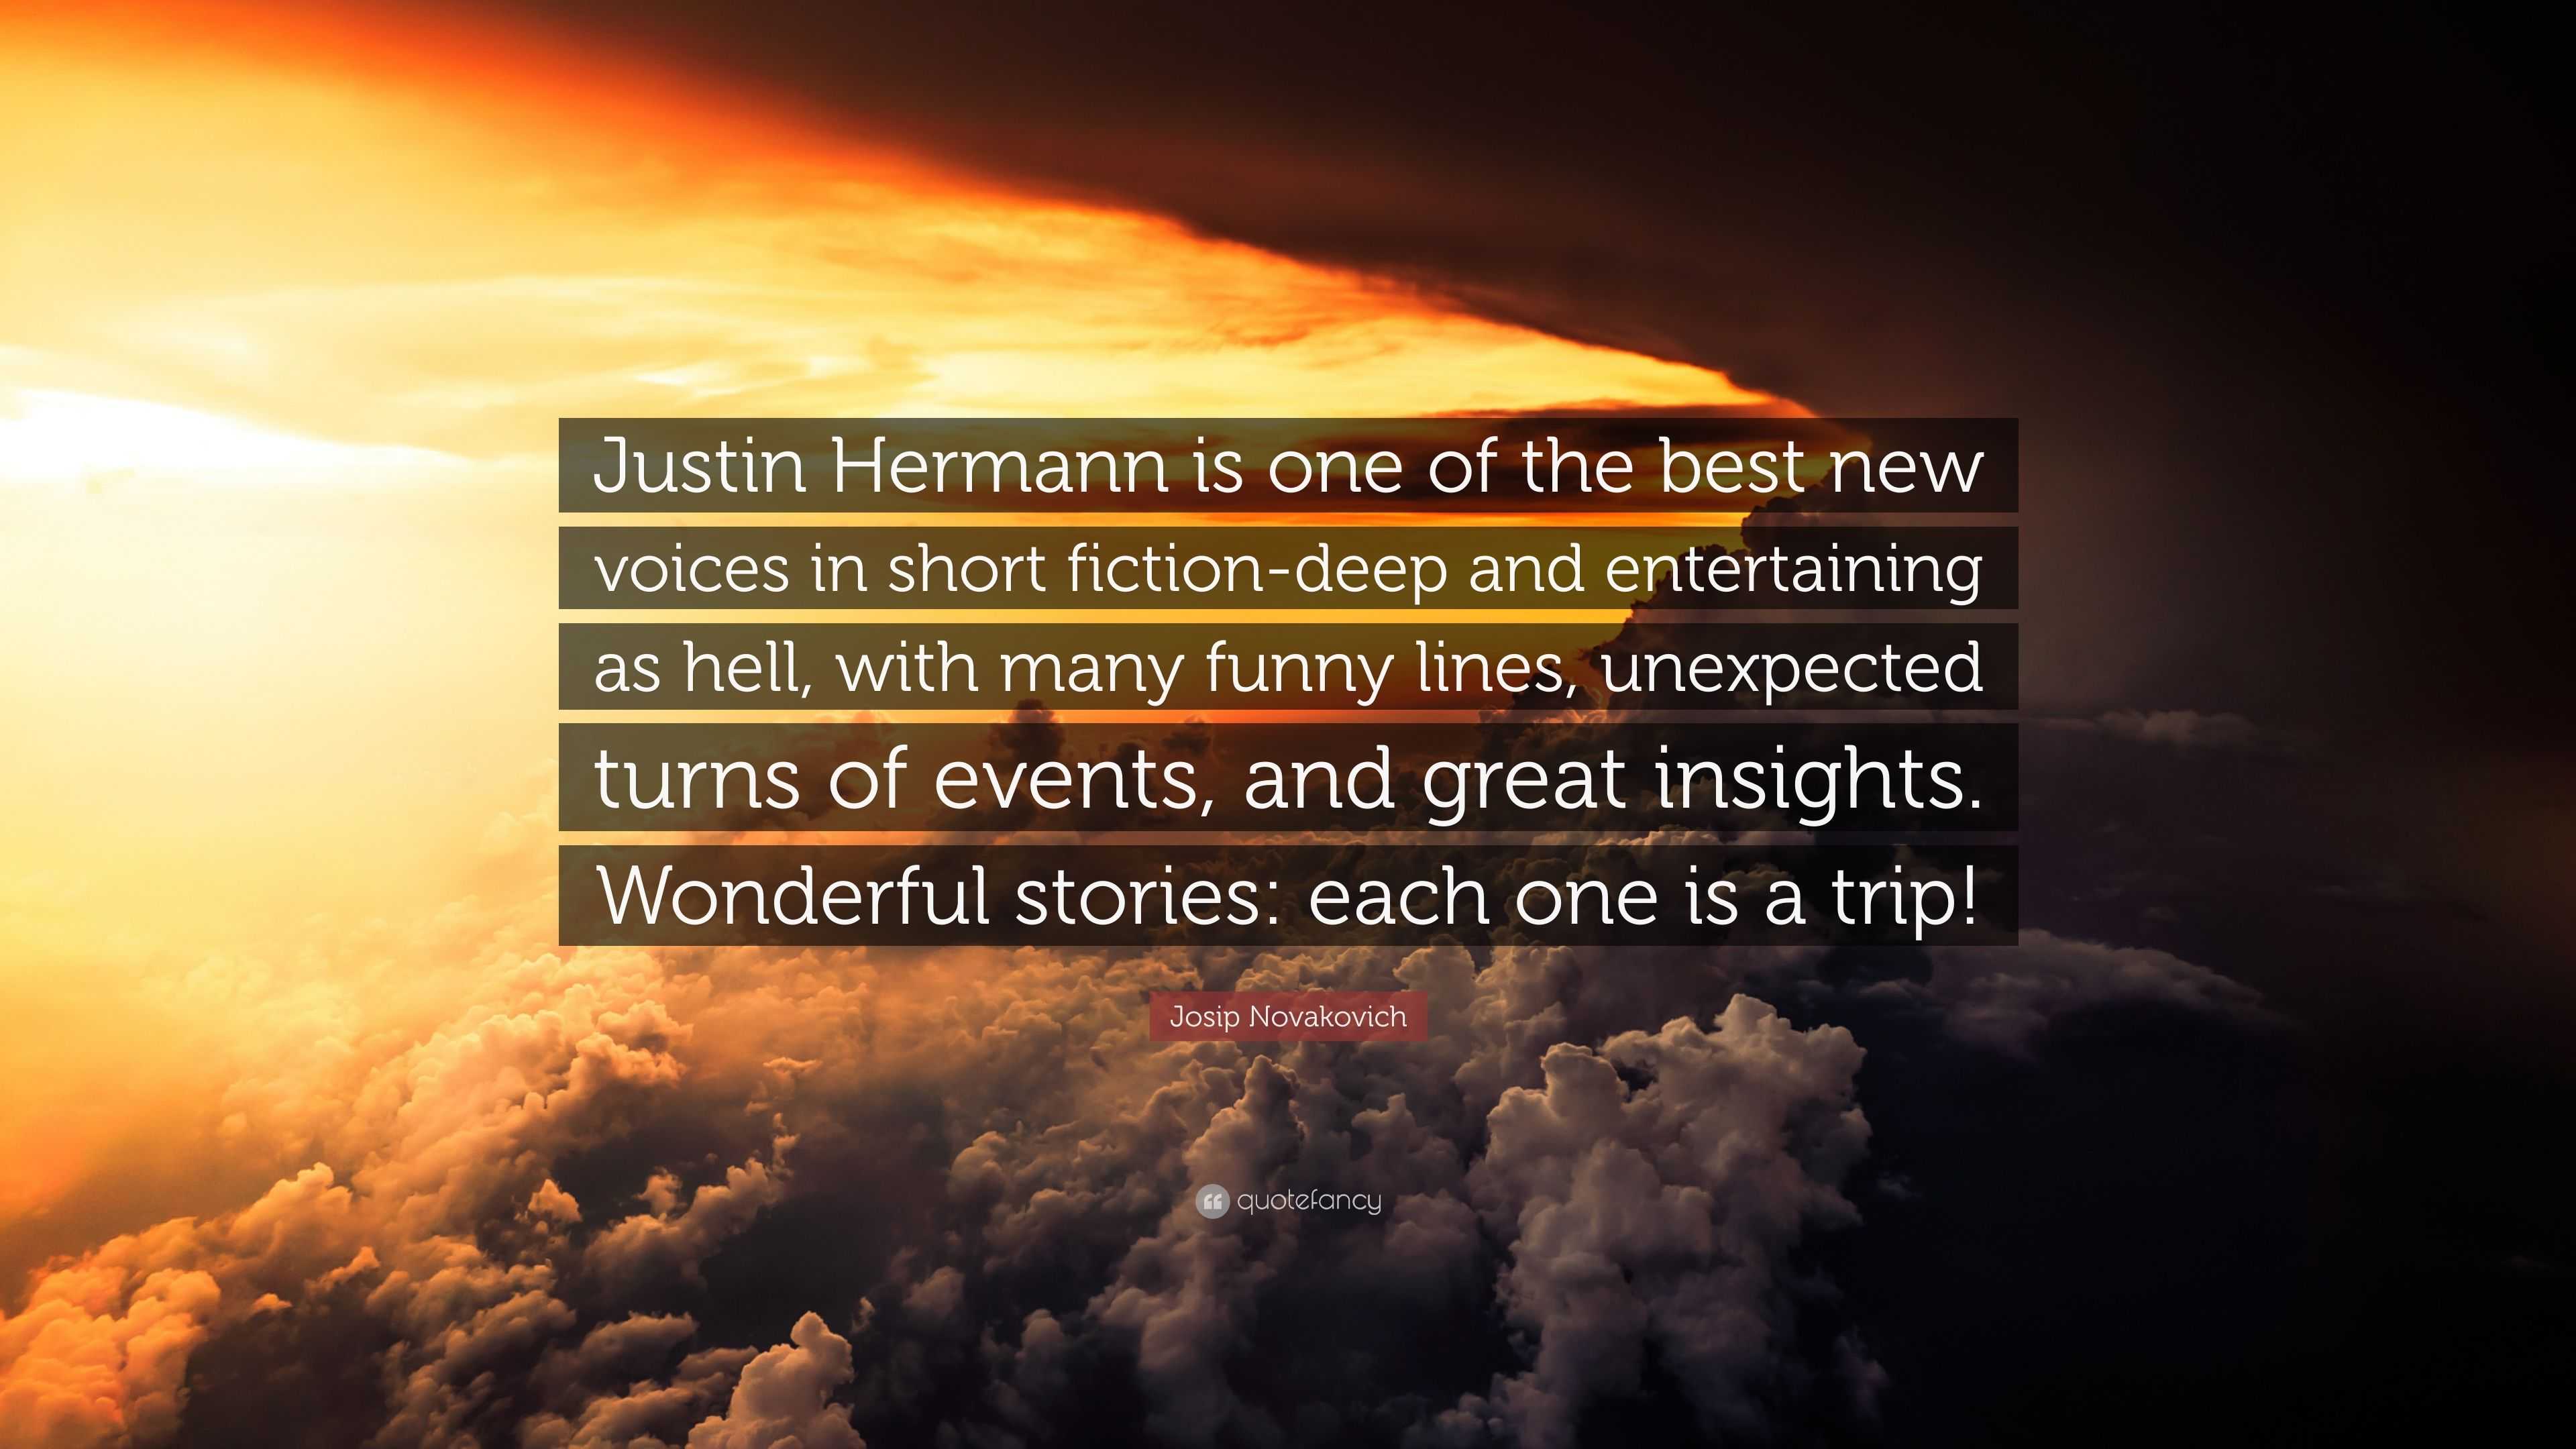 Josip Novakovich Quote: “Justin Hermann is one of the best new voices in  short fiction-deep and entertaining as hell, with many funny lines, unex...”